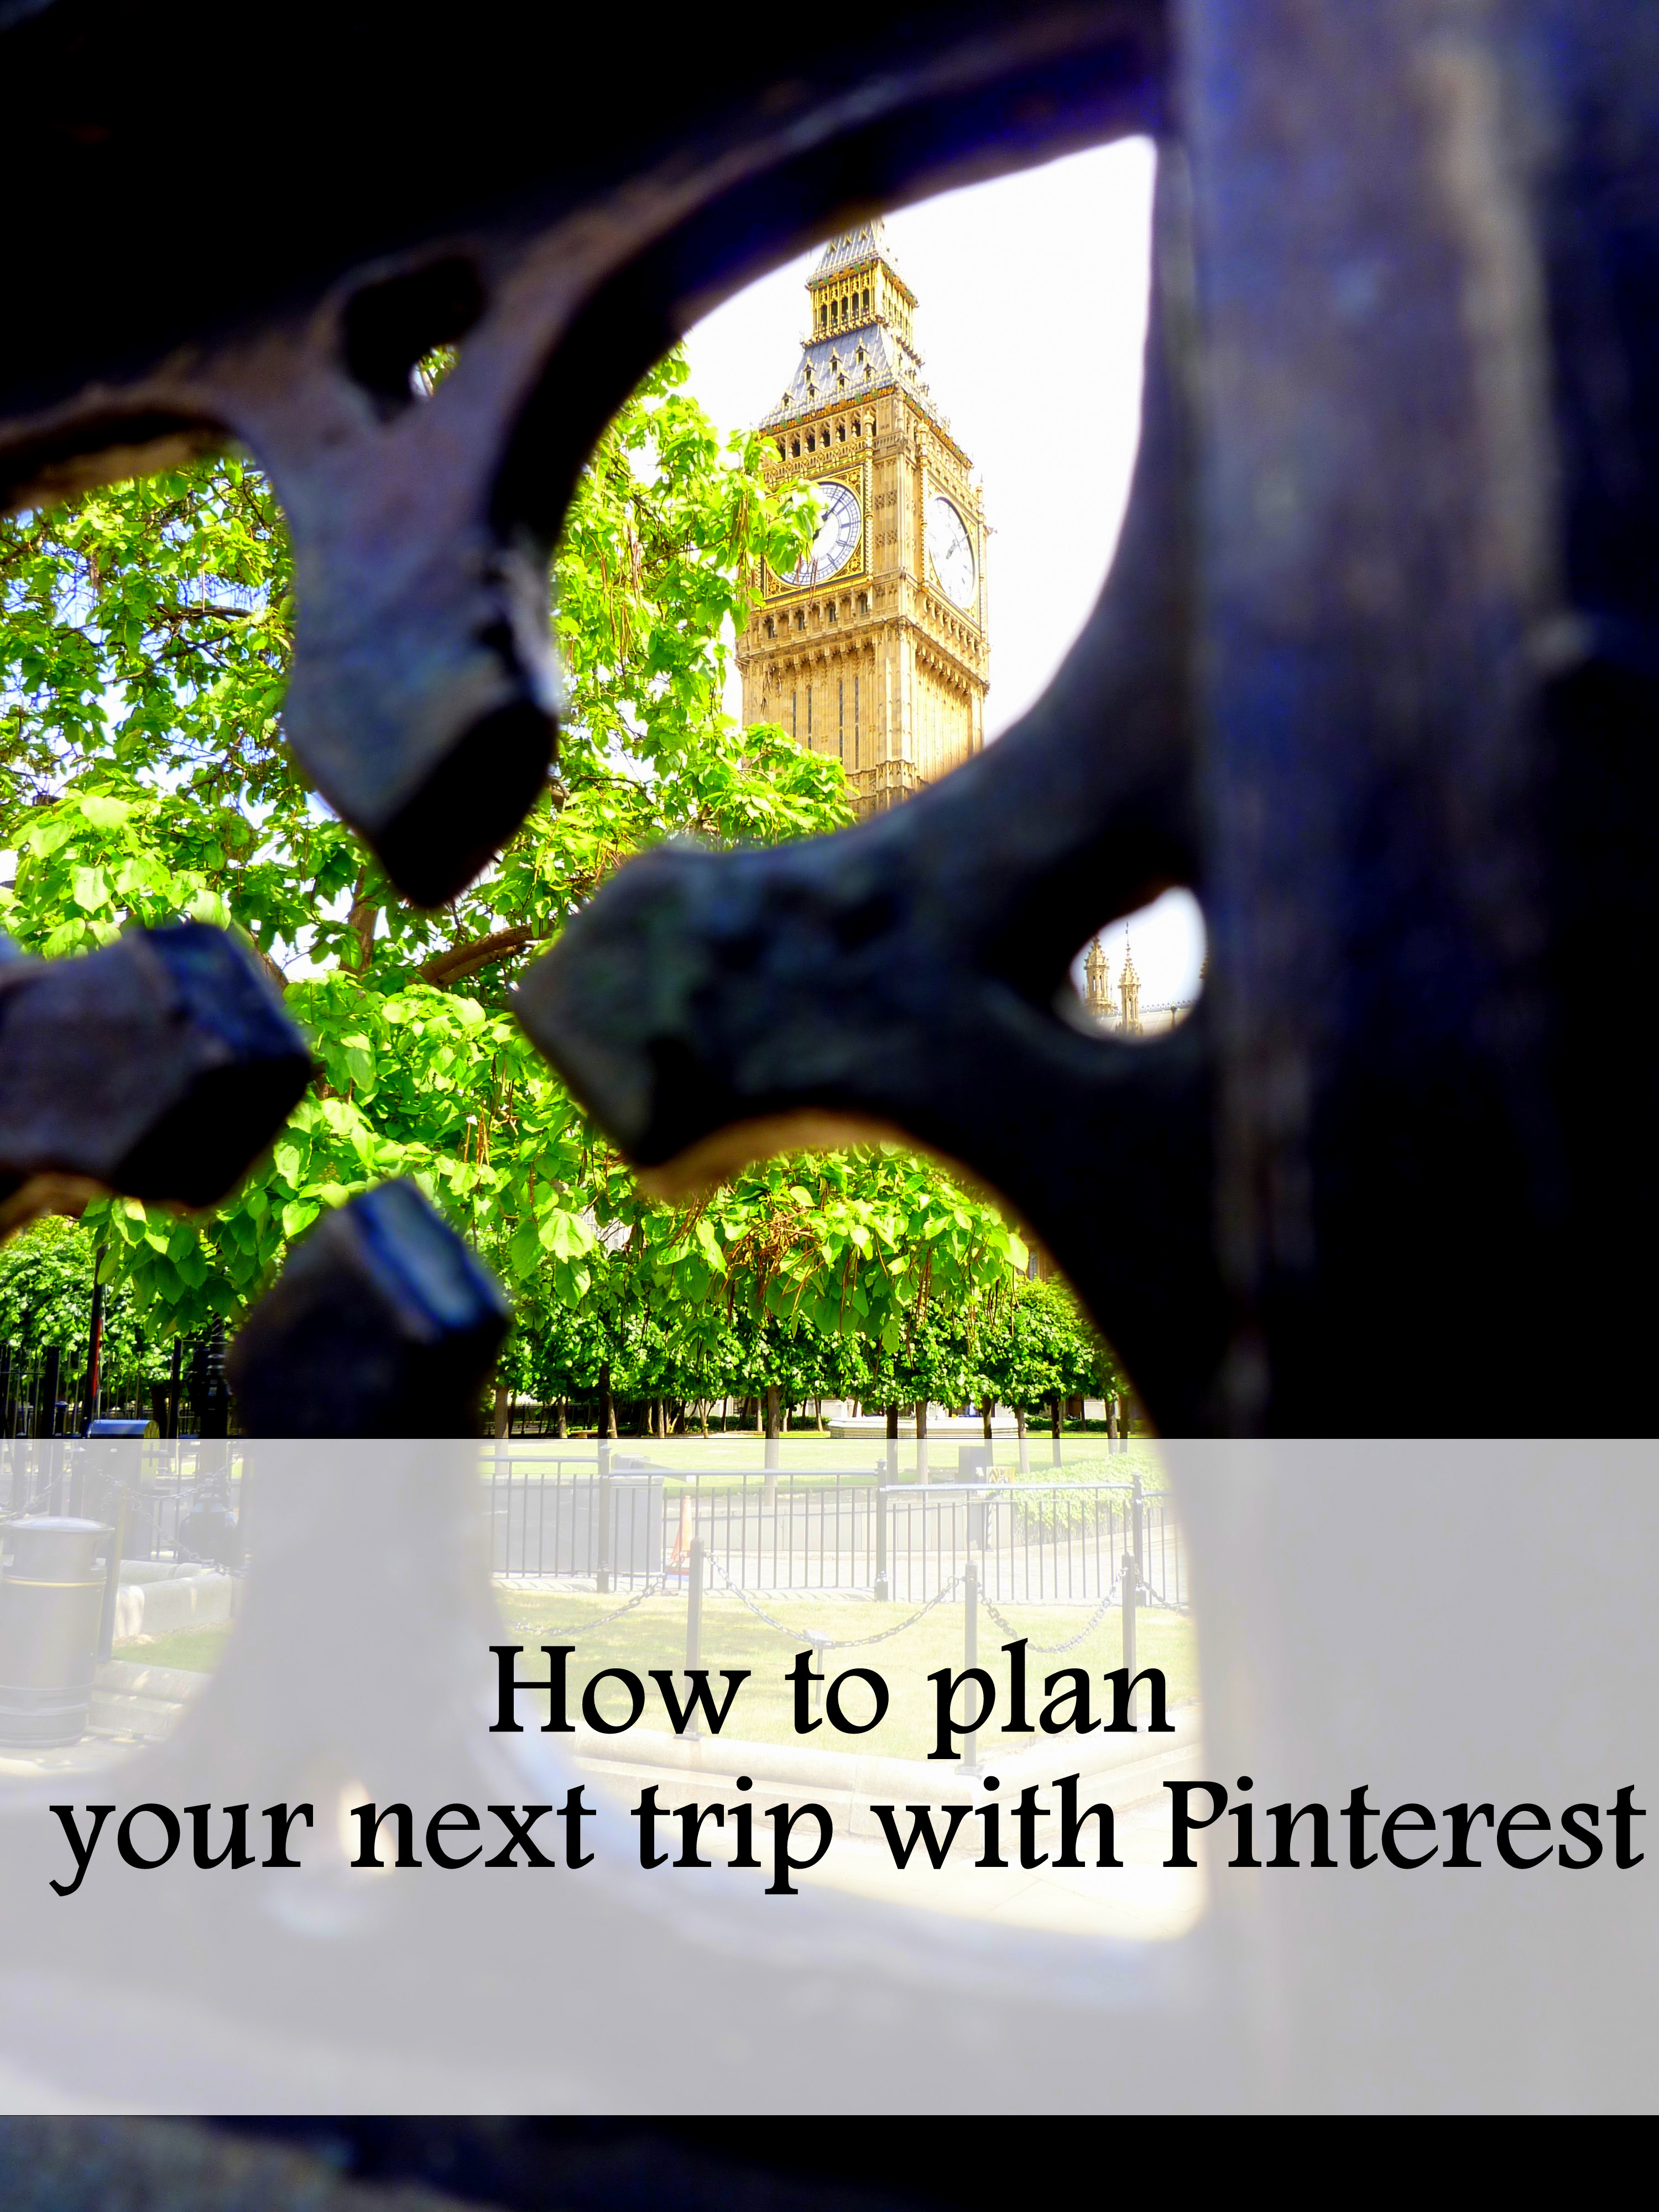 Plan with Pinterest